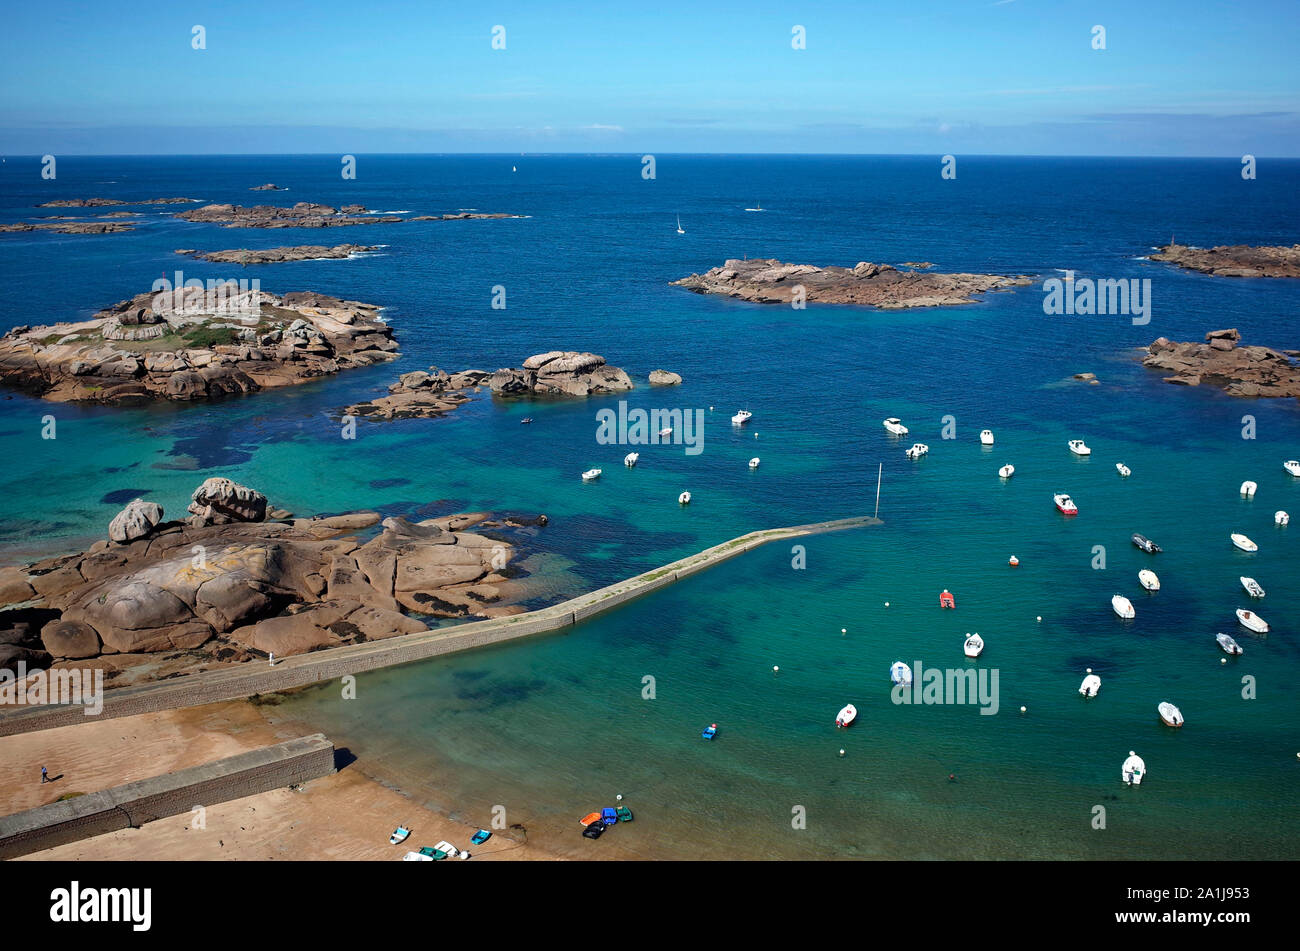 Tregastel (Brittany, north-western France): aerial view of the harbour and the “cote de Granit rose” coastal area Stock Photo